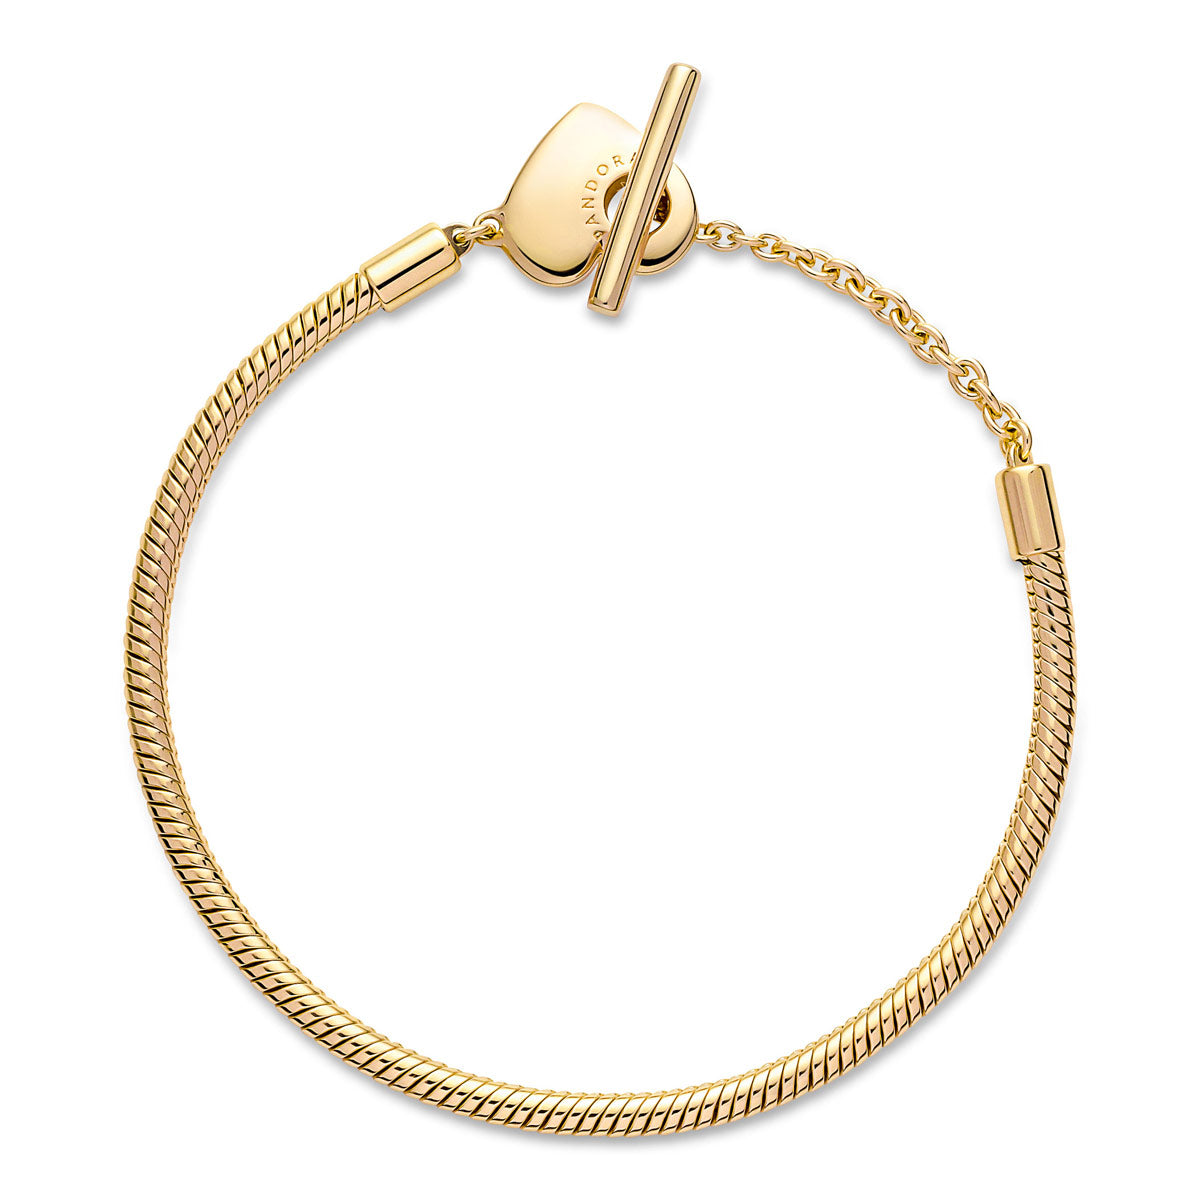 Bespoke 9ct Solid Yellow Gold Round Belcher Bracelet with a Georgian i – PI  London